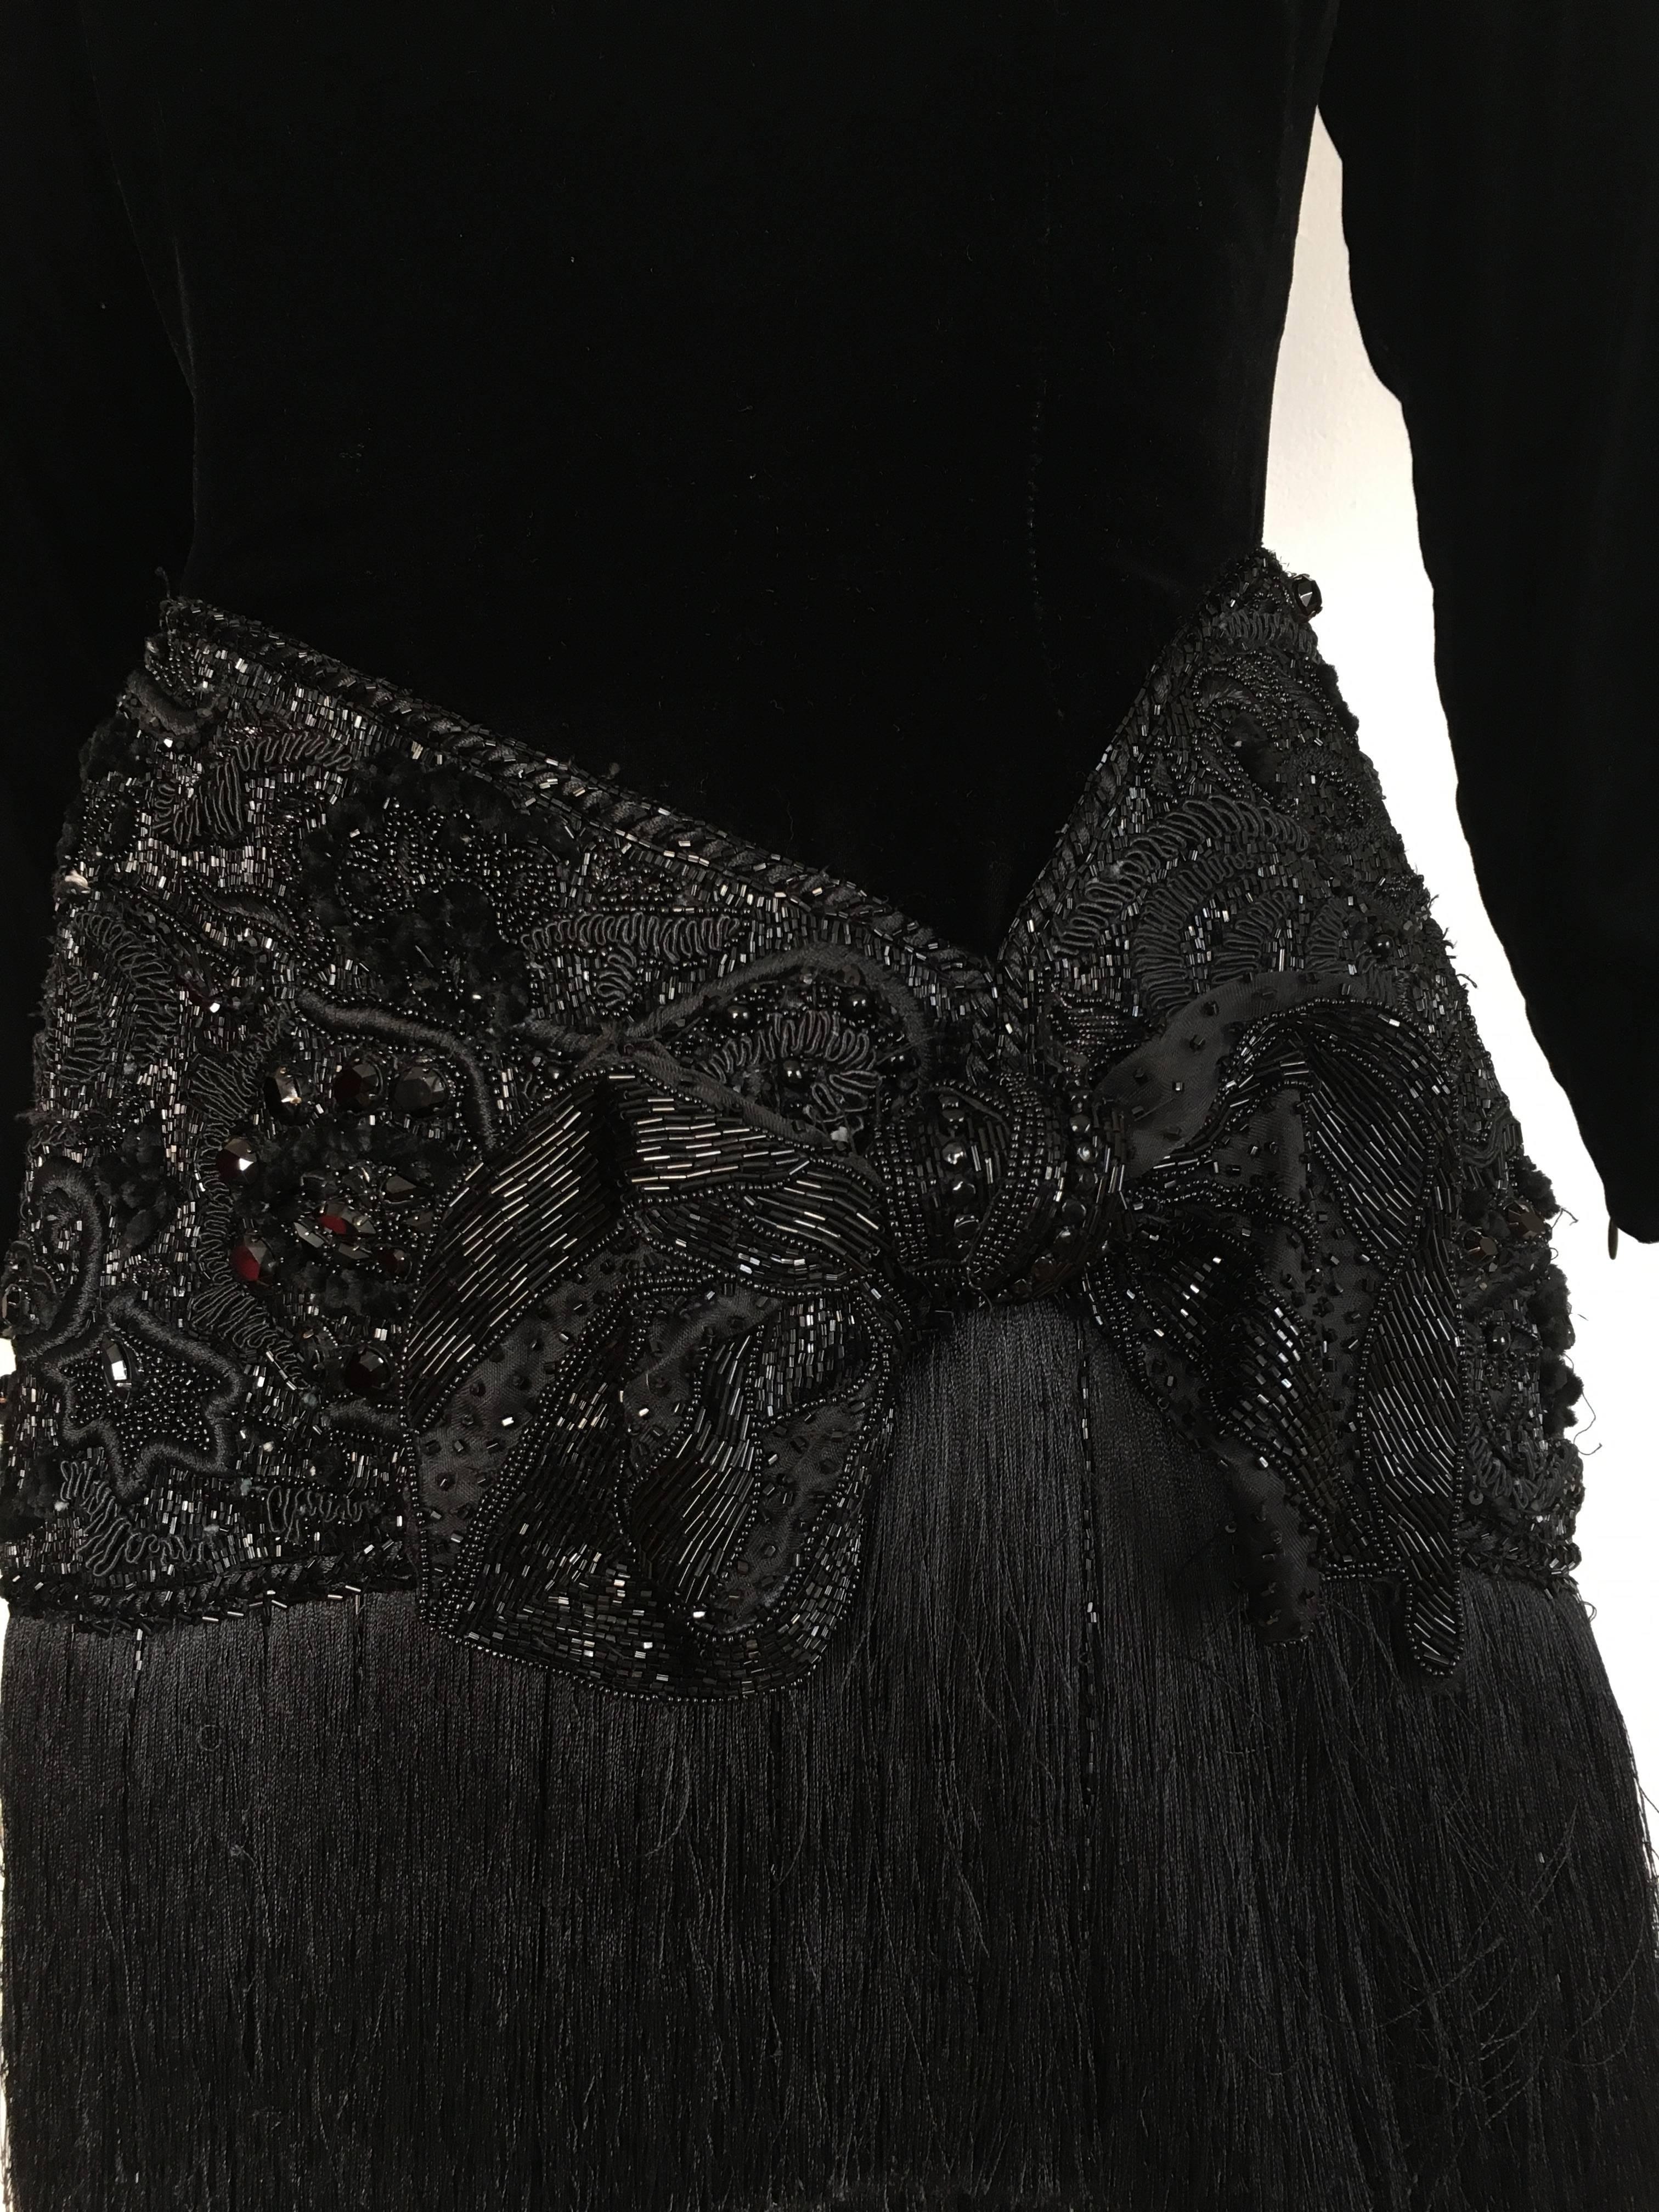 Oscar de la Renta for Saks Fifth Avenue black velvet beaded & fringe evening cocktail dress is a size 6.  Ladies please grab your most trusted friend, Mr. Tape Measure, so you can measure your bust, waist & hips to make certain this dress is exactly